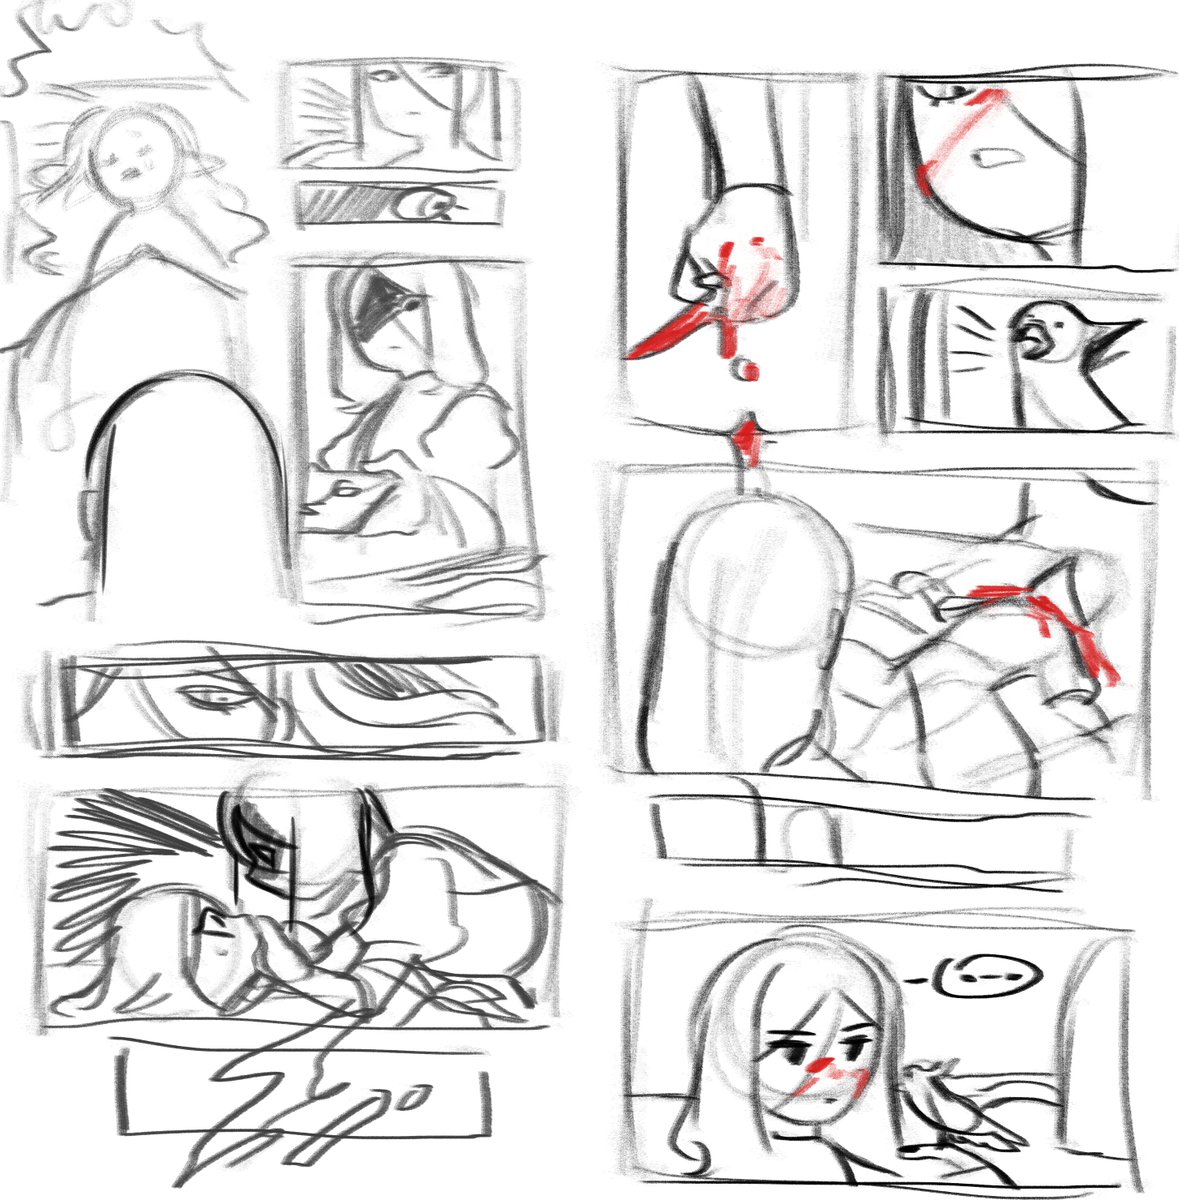 oh yeah
a rough concept of a little comic I wanted to do for my boy ''valak''

he a bitch(?) 